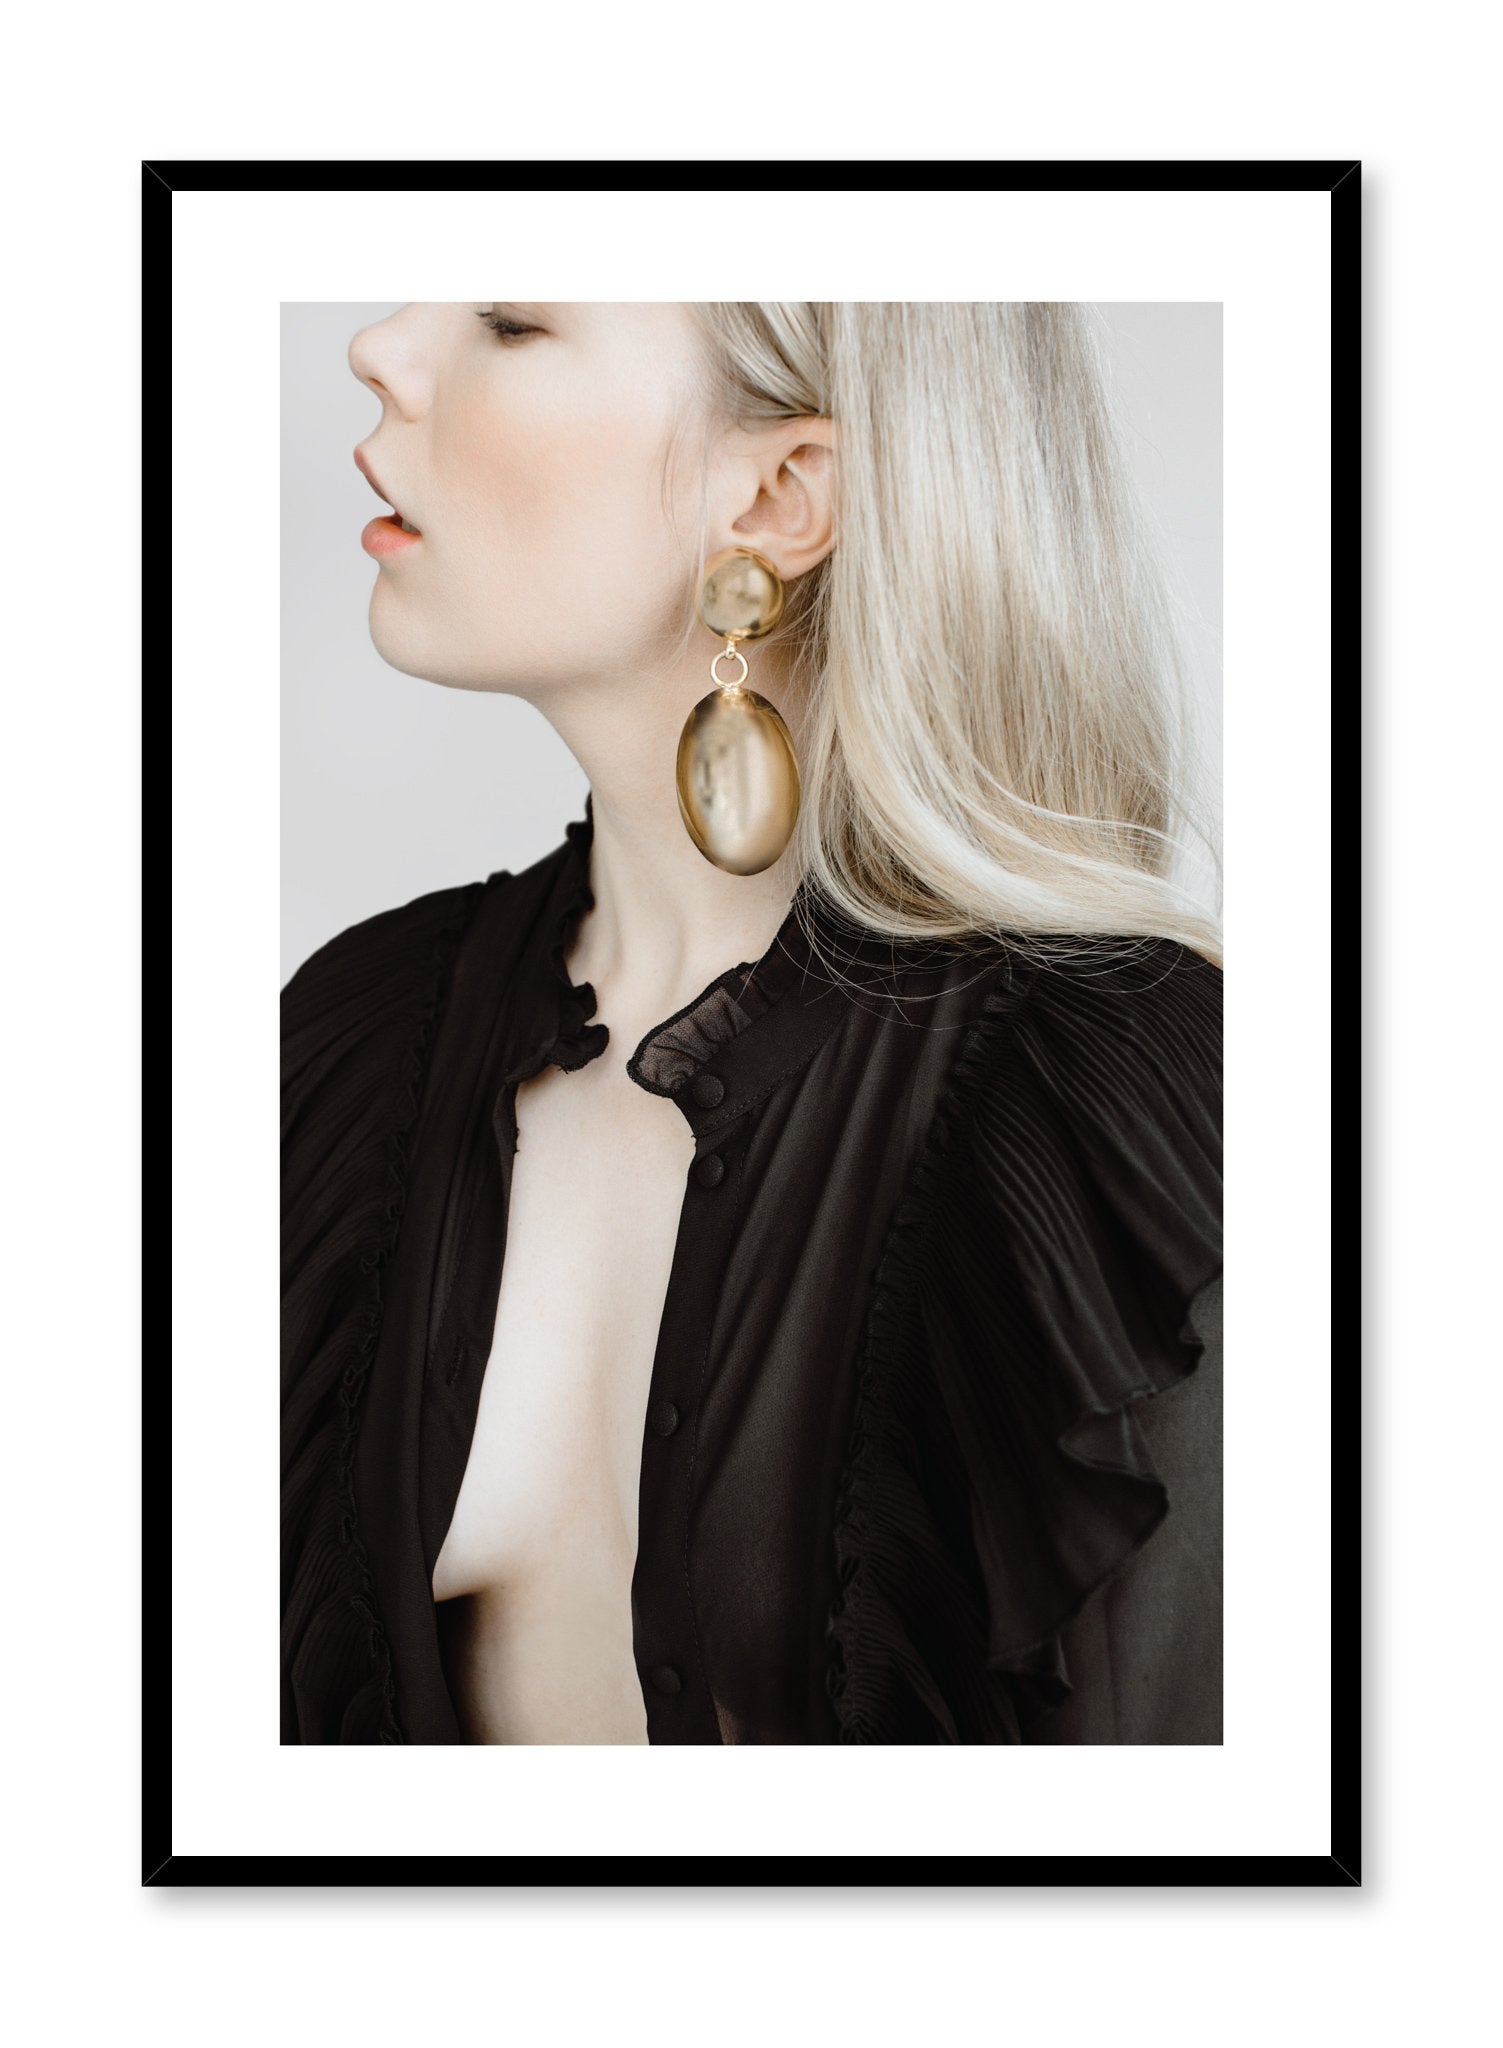 Fashion photography poster by Opposite Wall with woman wearing gold earring